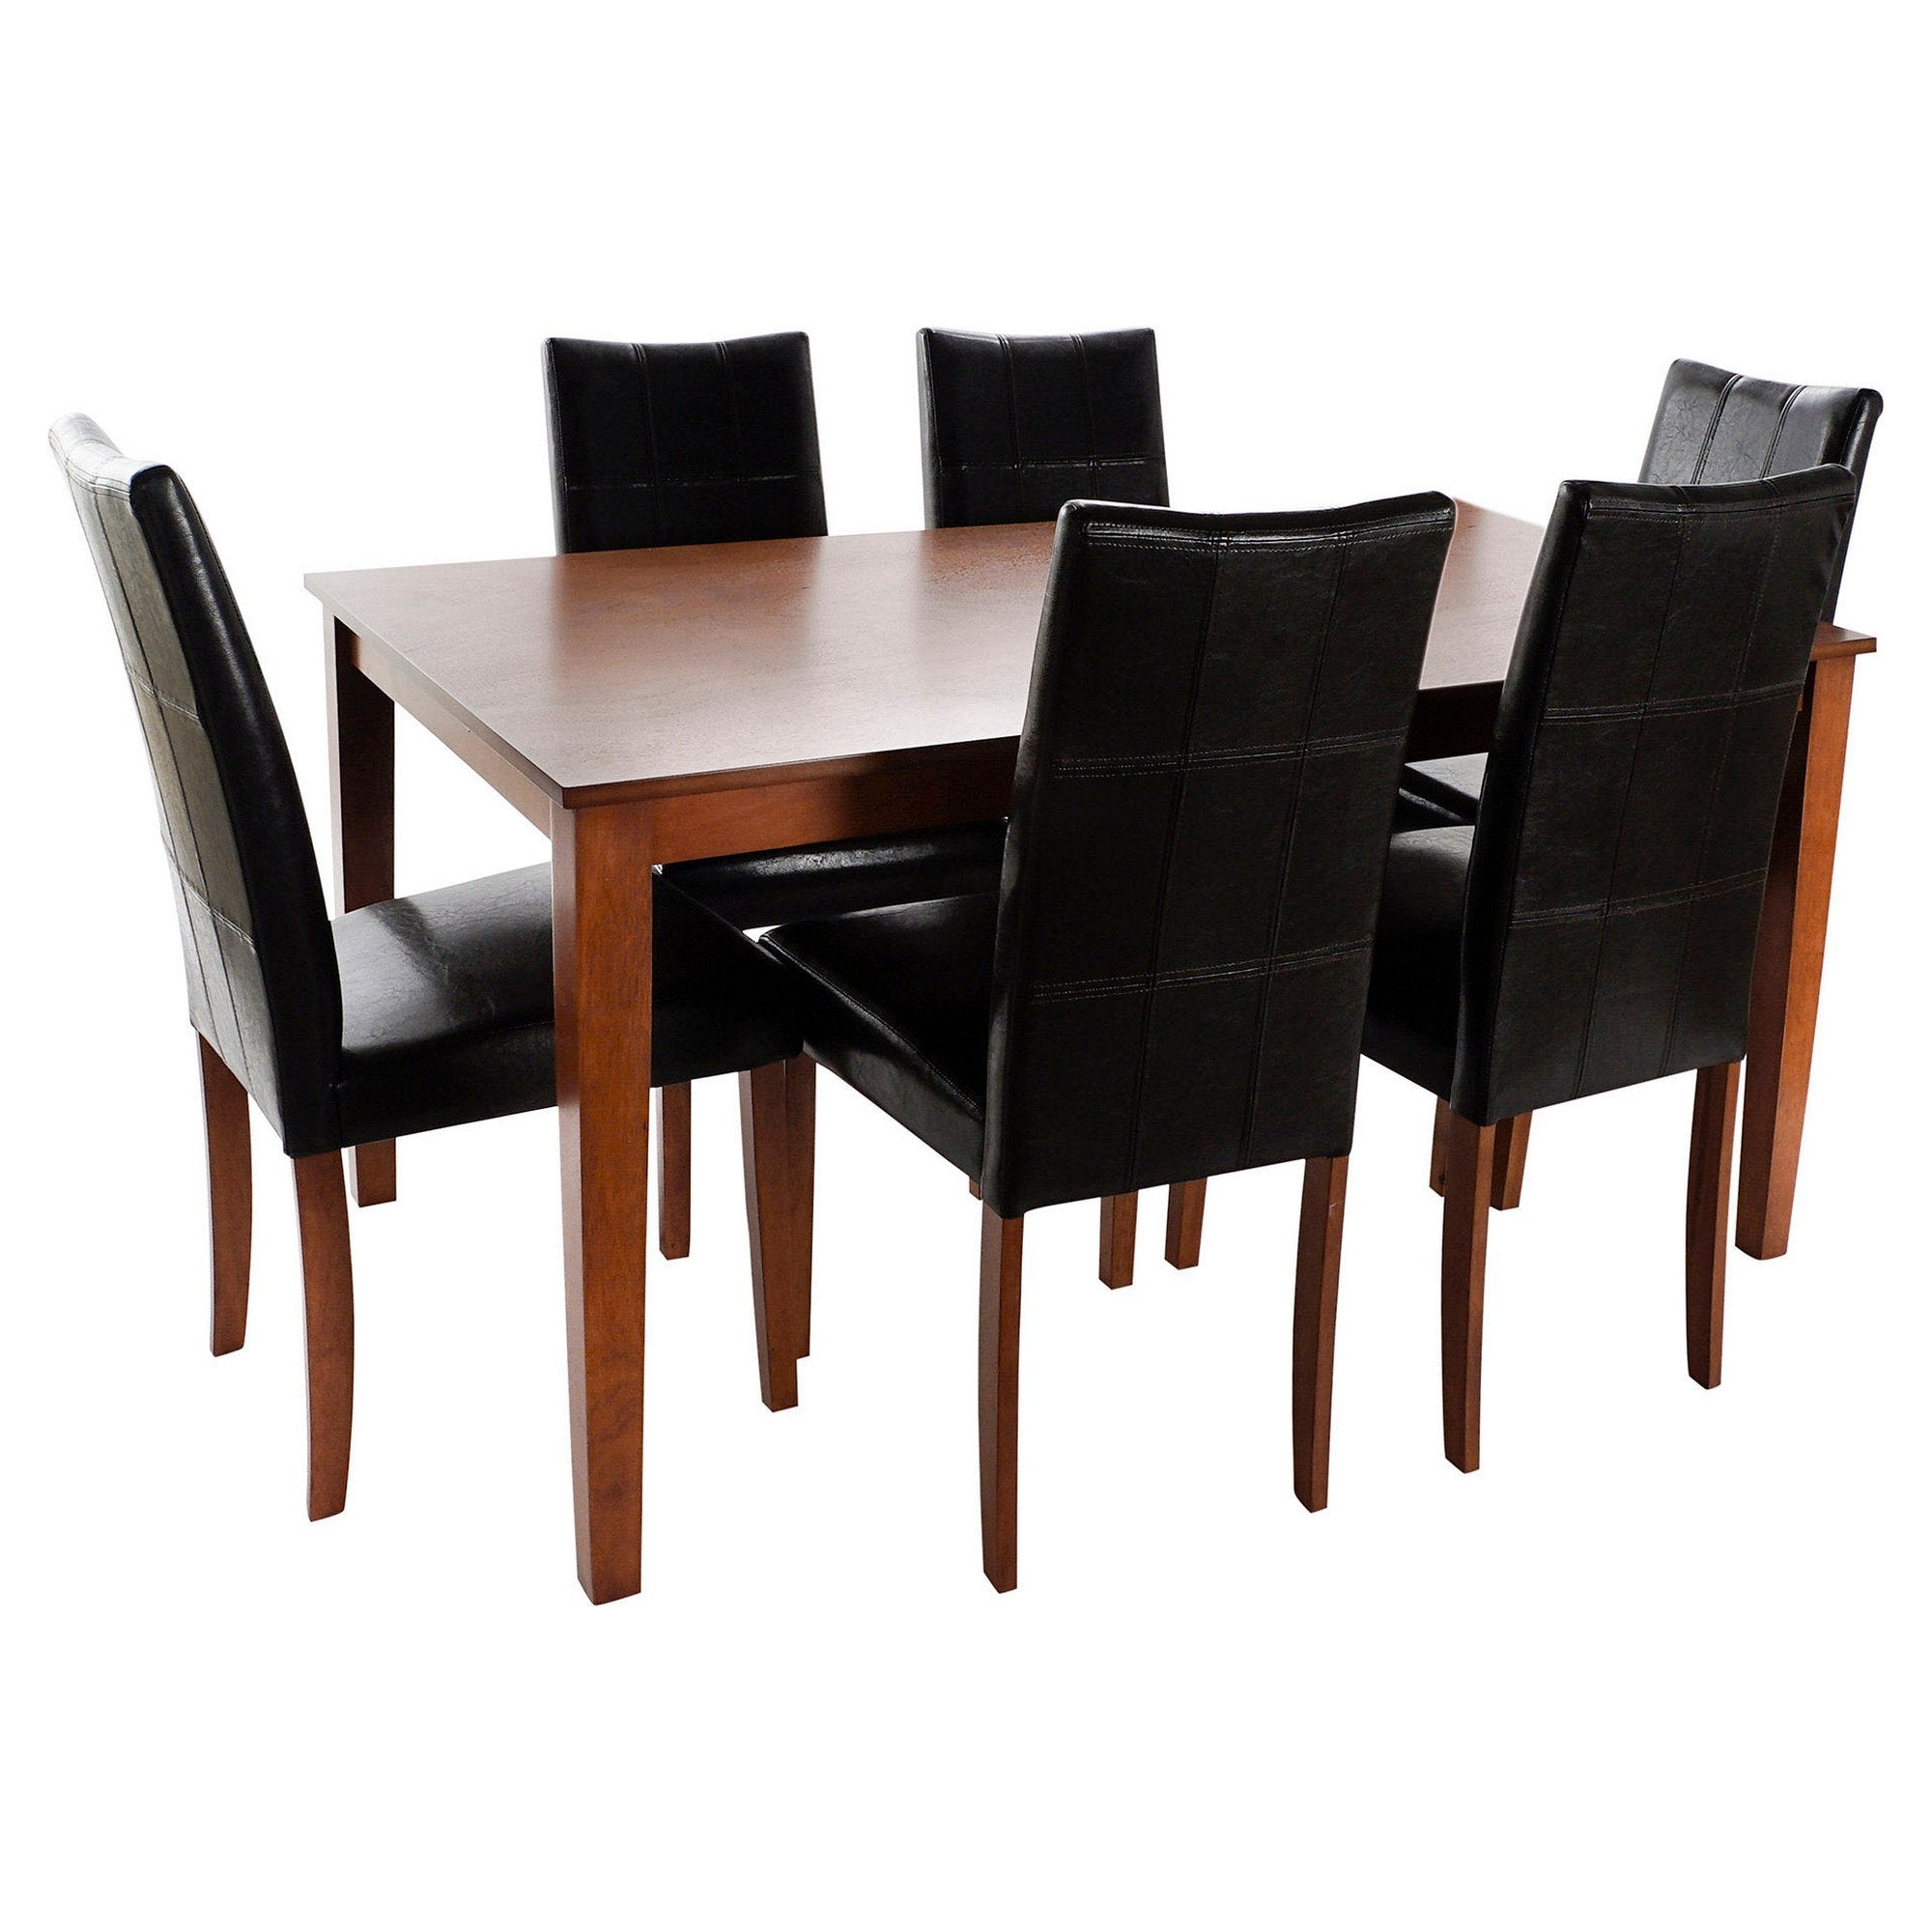 Table and 6 chairs from the Oak collection (7 pieces)